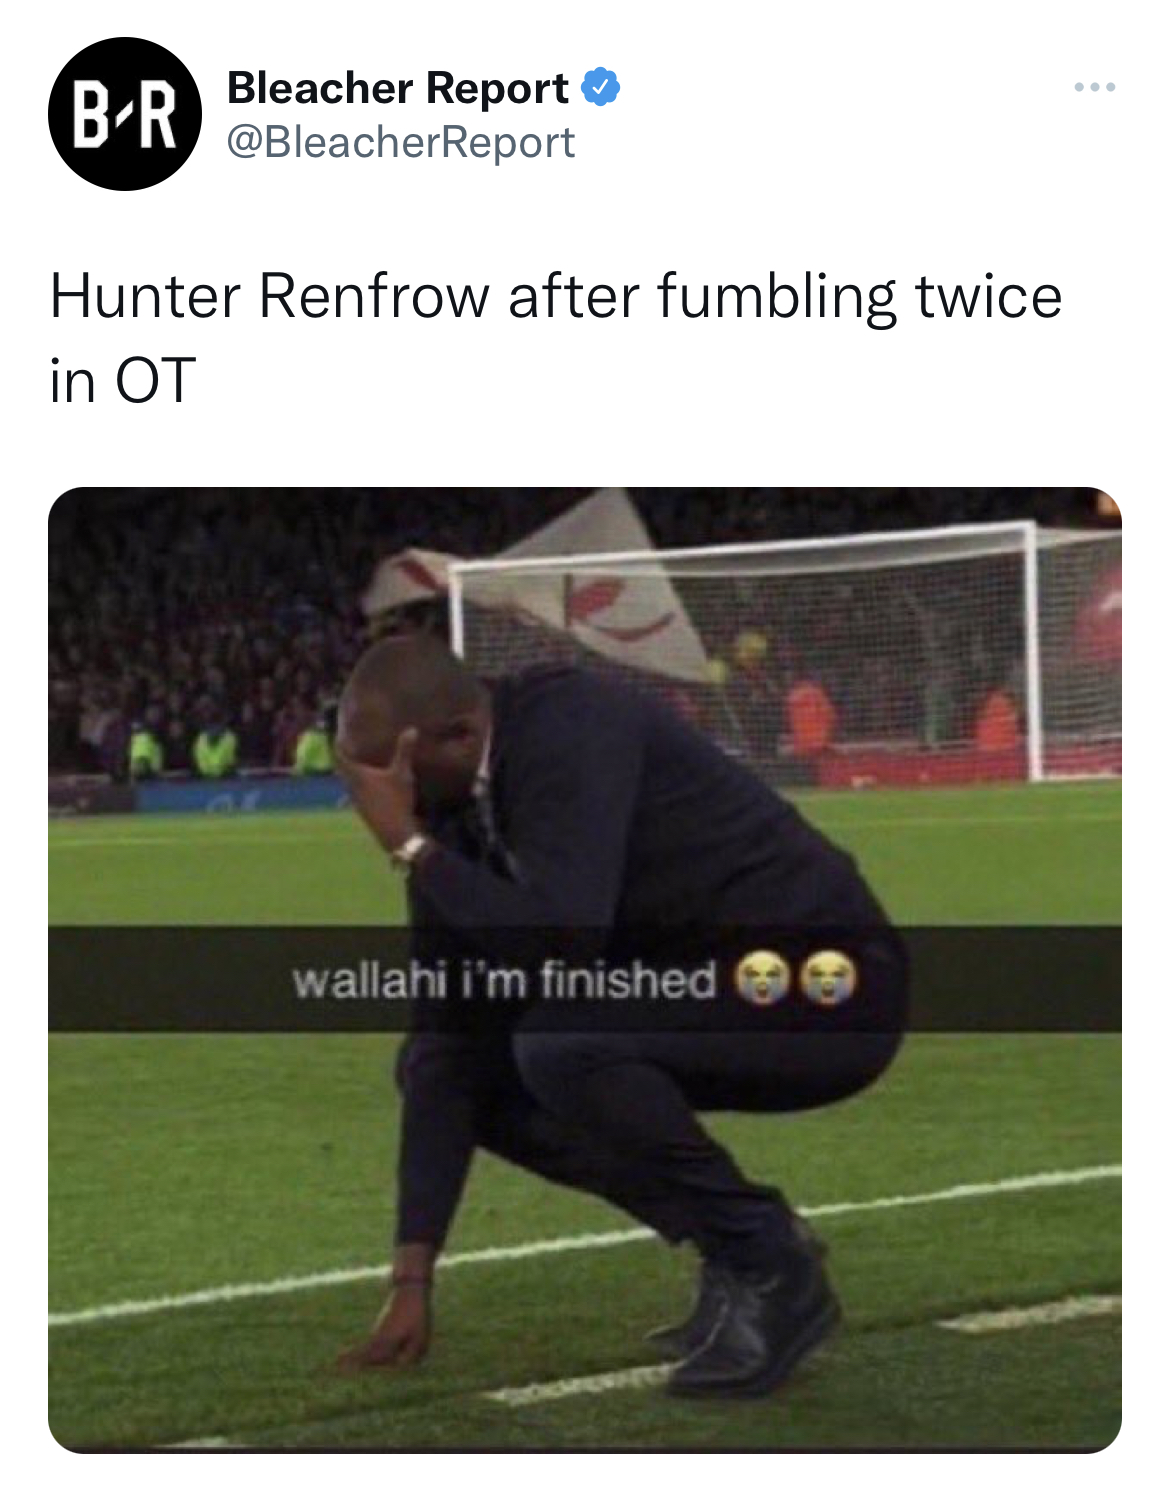 salty and savage nfl memes - player - Bleacher Report BR Report Hunter Renfrow after fumbling twice in Ot wallahi i'm finished www